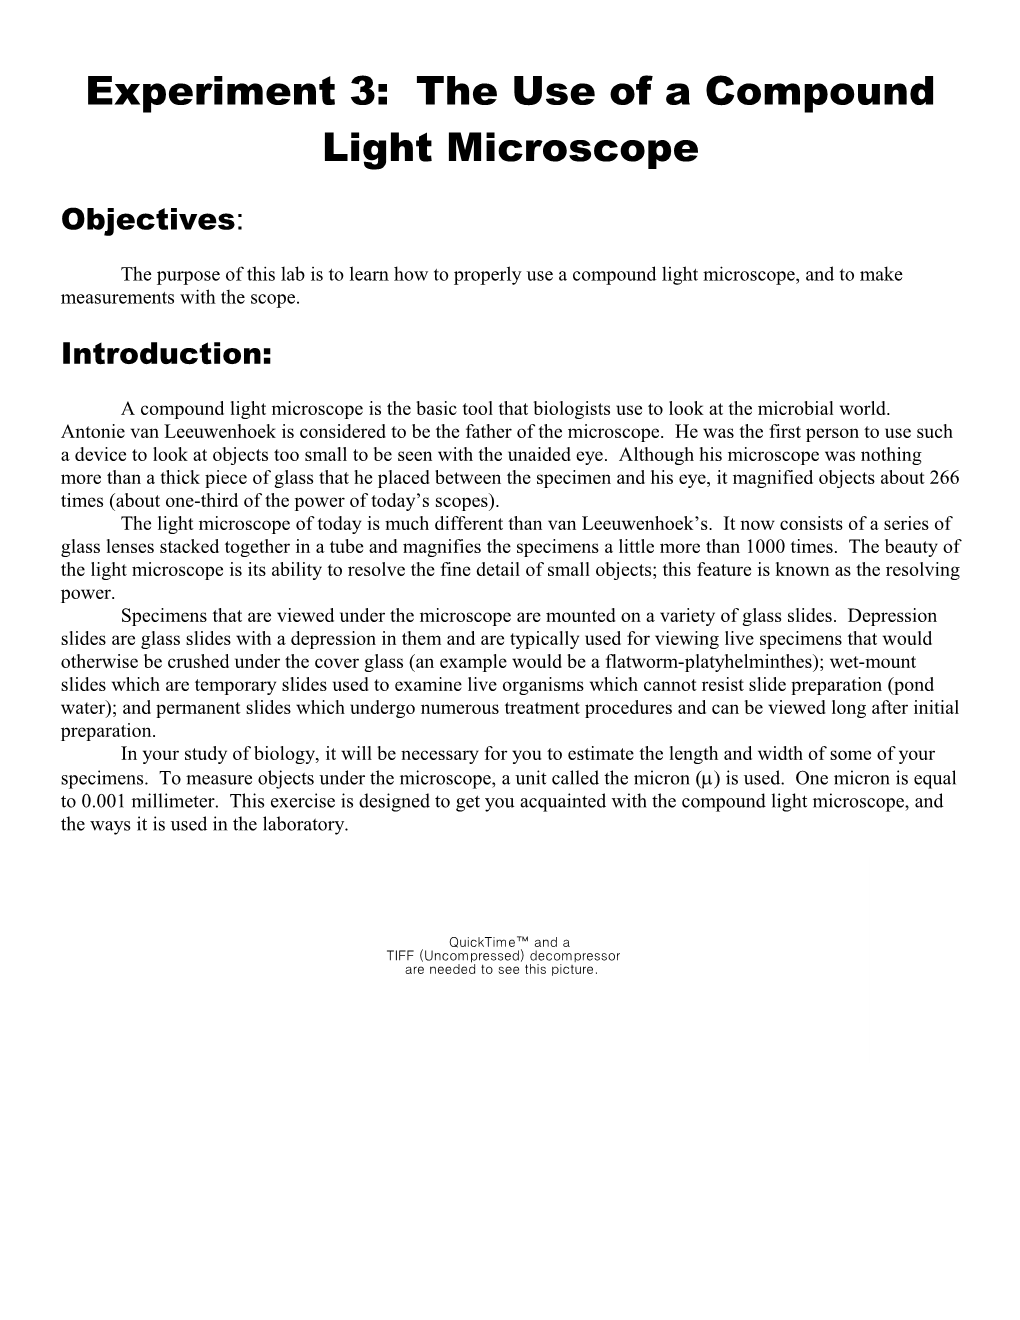 Experiment 3: the Use of a Compound Light Microscope